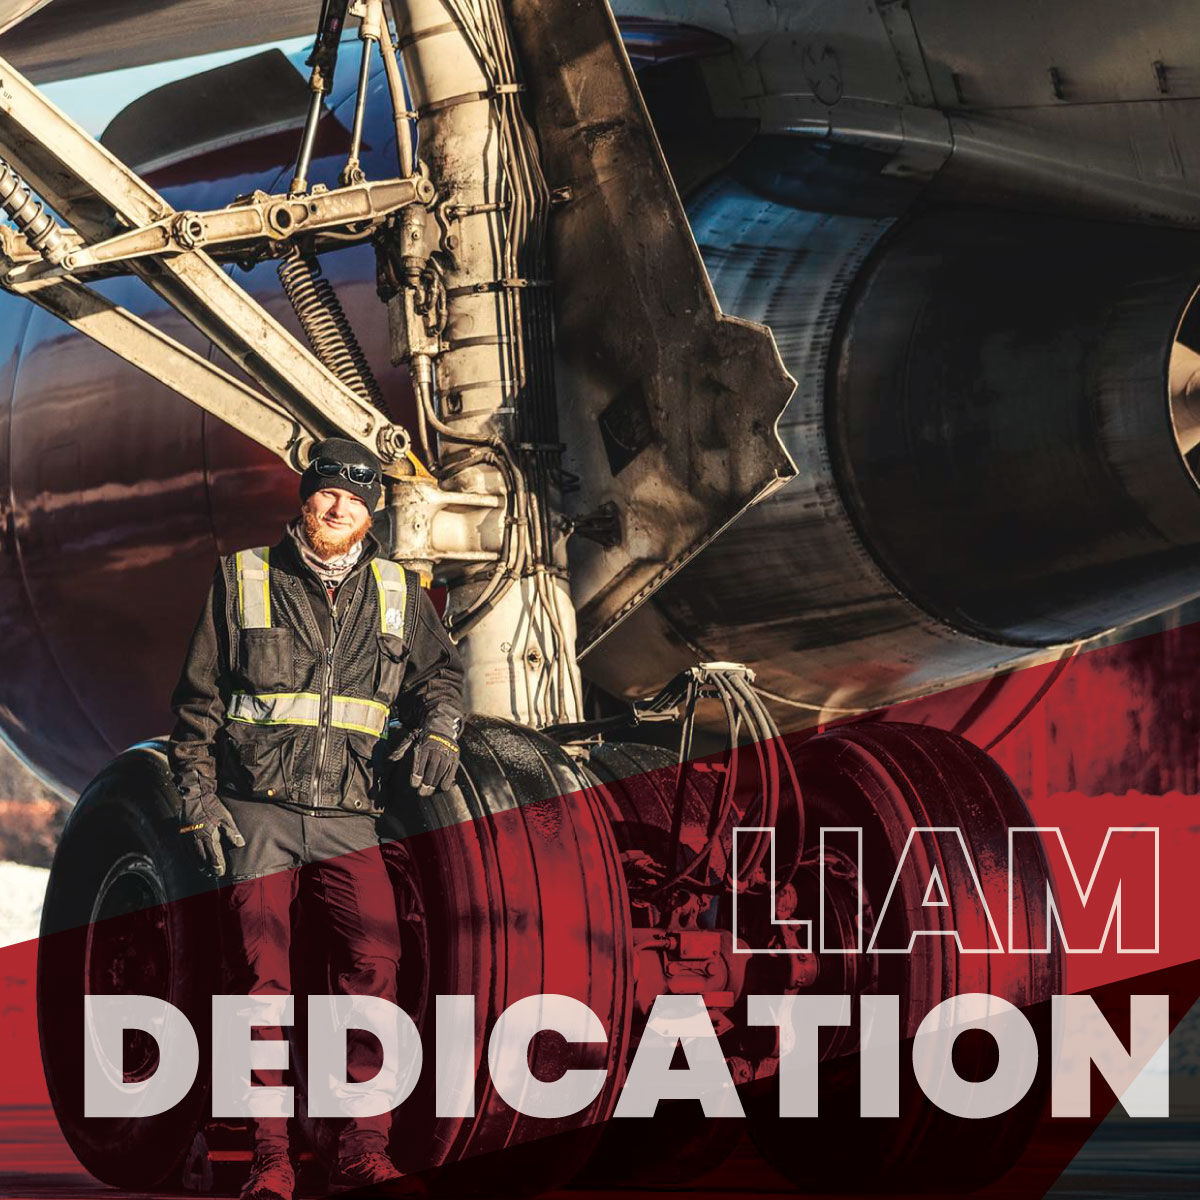 We're continuing to spotlight the talent that we are privileged to have as part of our team! Liam, who works as a flight mechanic, is the next employee we are excited to include! To read Liam's spotlight, visit bit.ly/3NFW8lC #EmployeeRecognition #AviationMaintenance